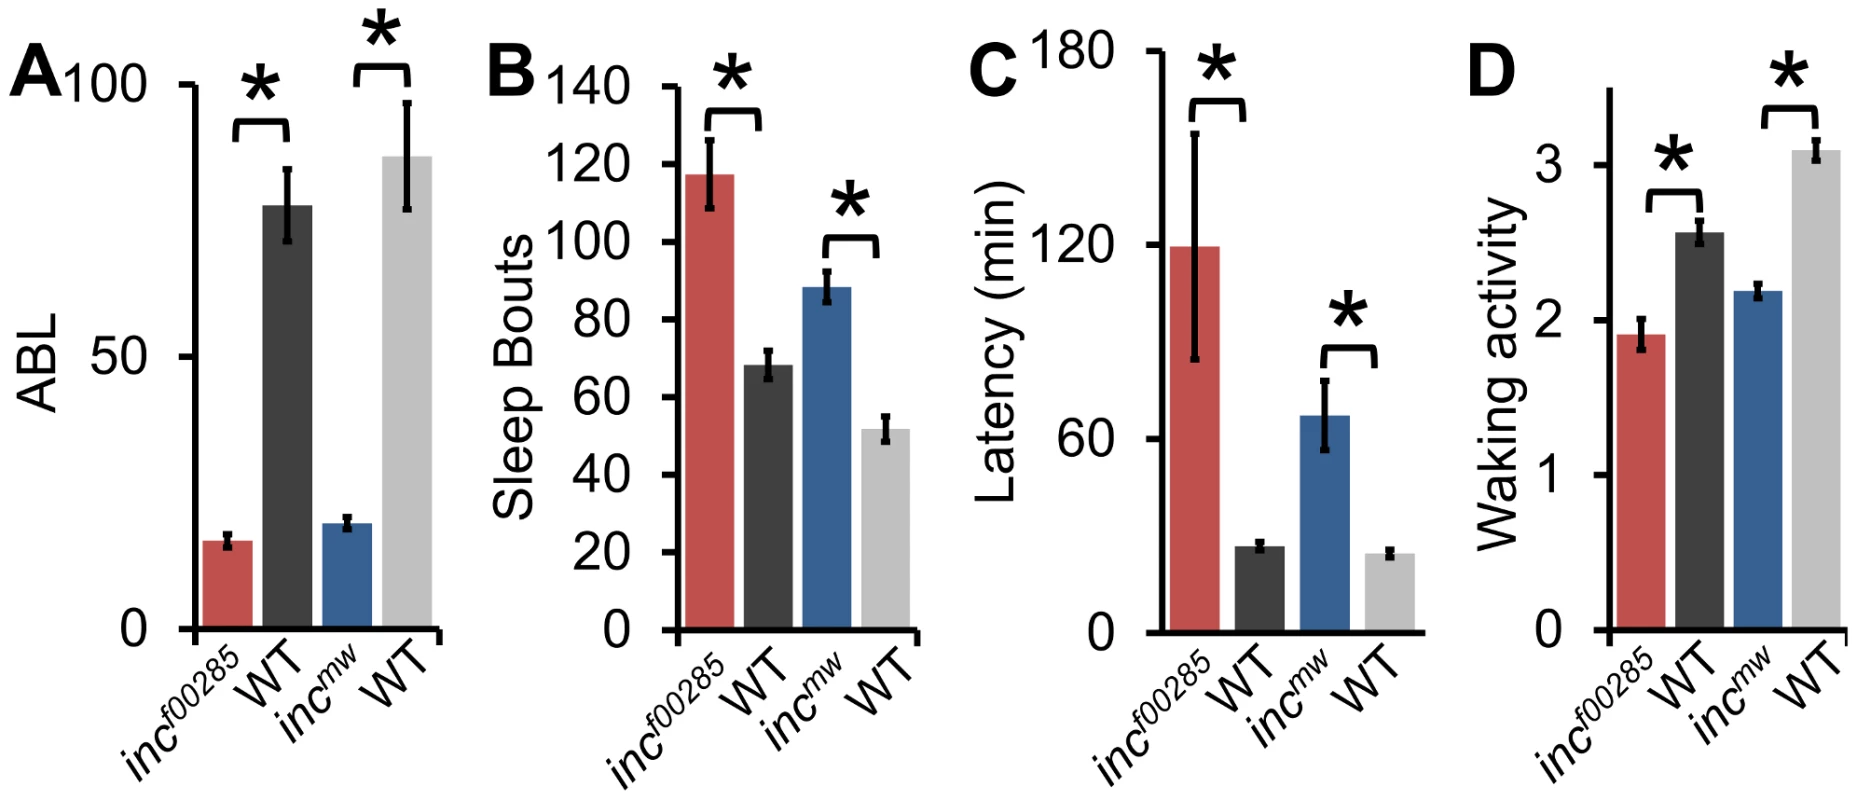 Sleep architecture is altered in <i>inc</i> mutants.